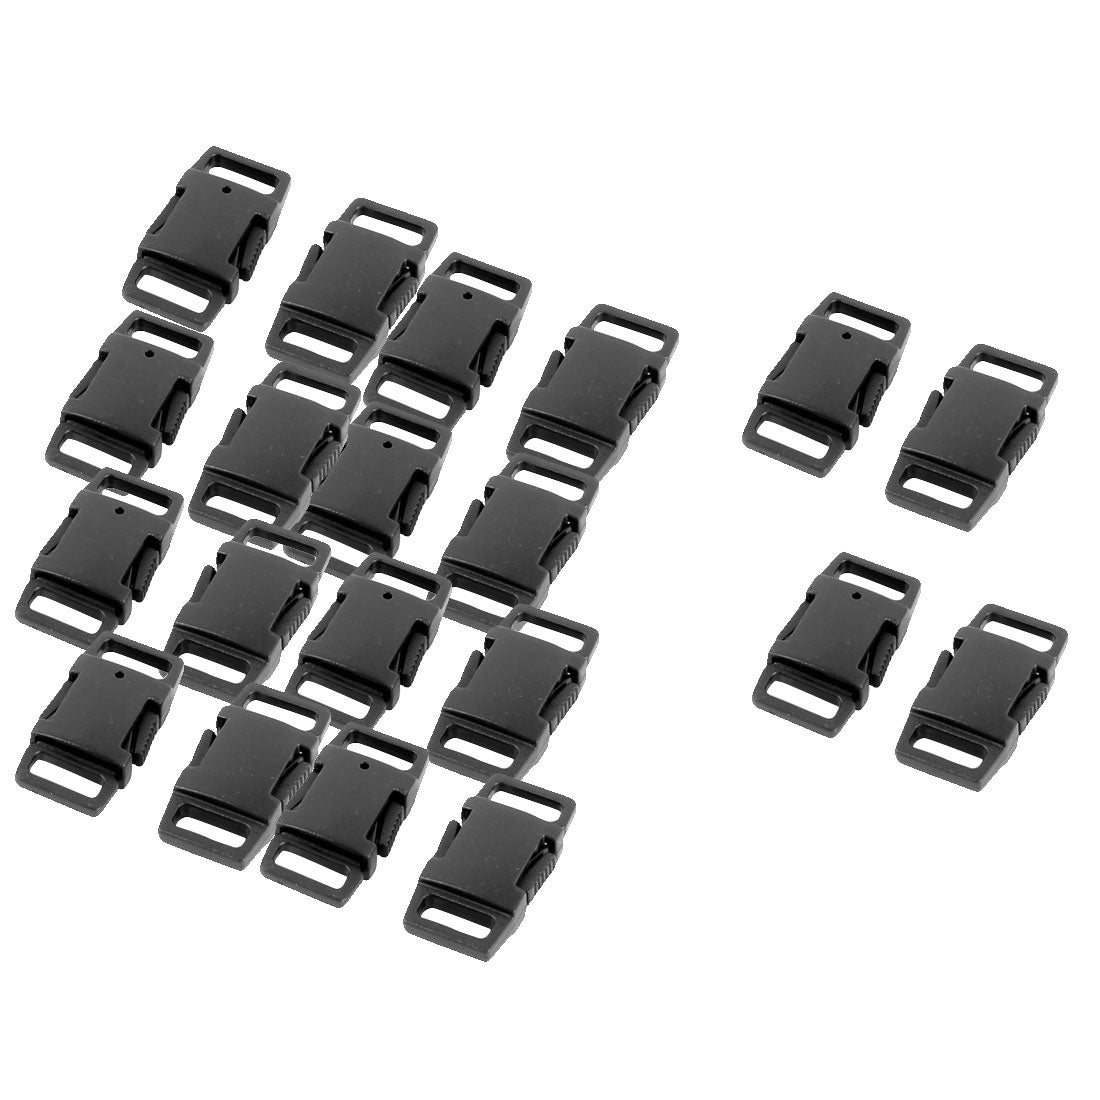 uxcell Uxcell Handbag Plastic Strap Double Side Quick Release Buckle Fastener Black 20 Pcs